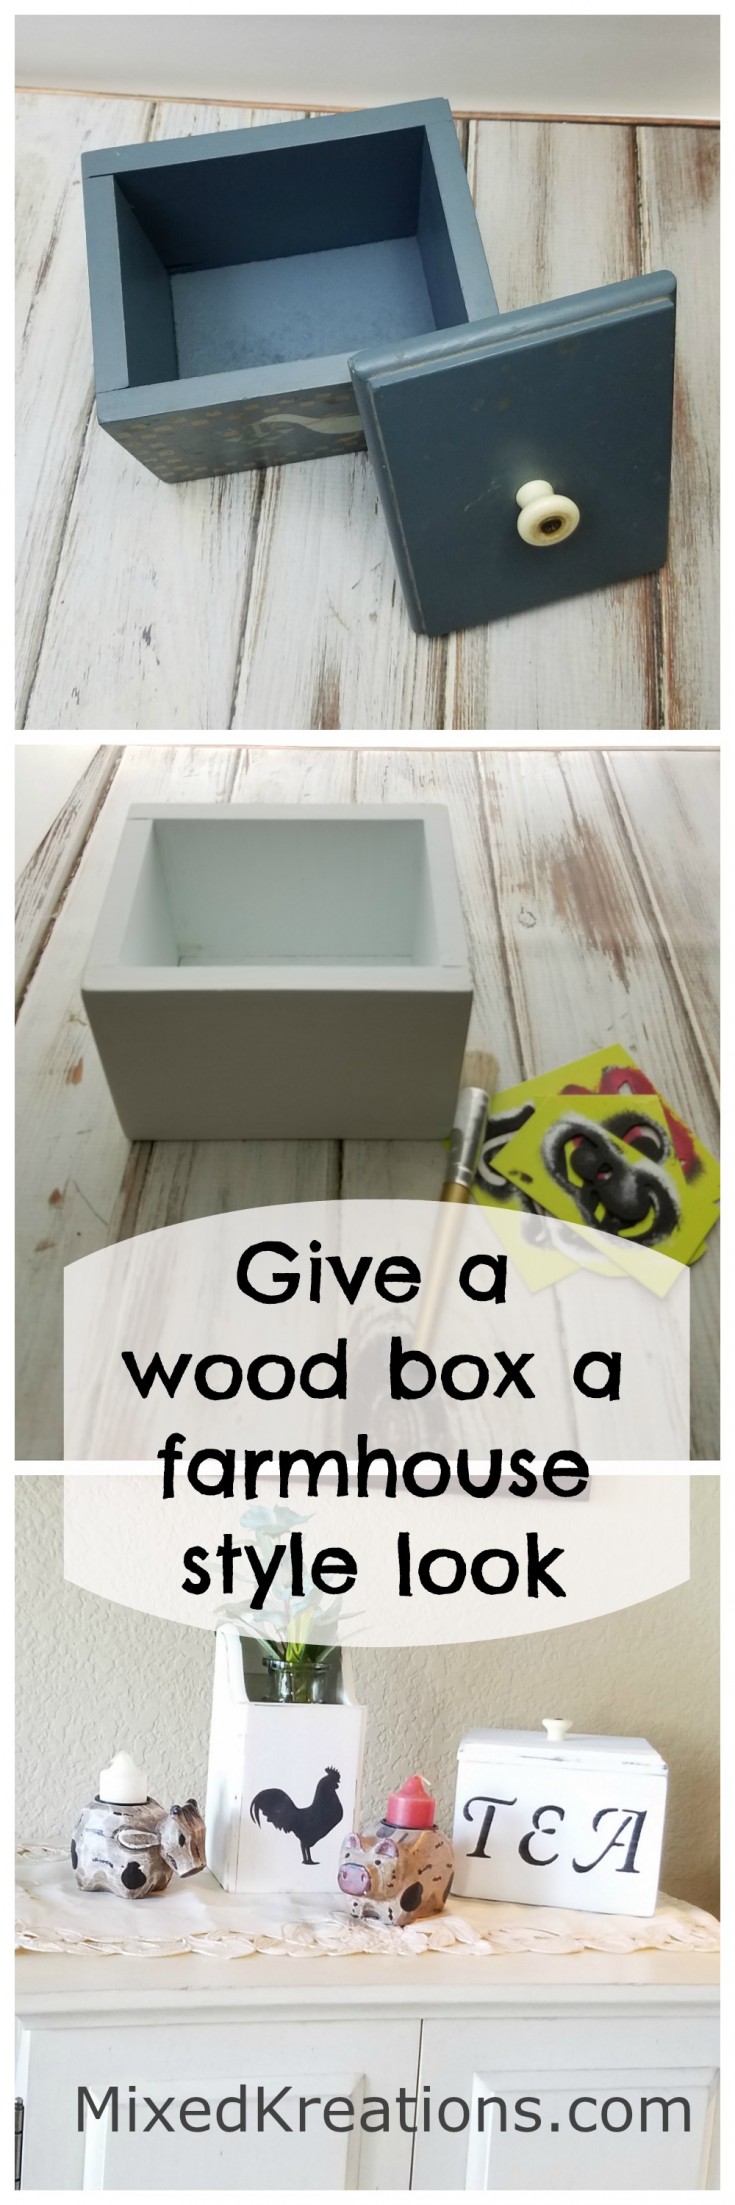 how to give a wood box the farmhouse style look 